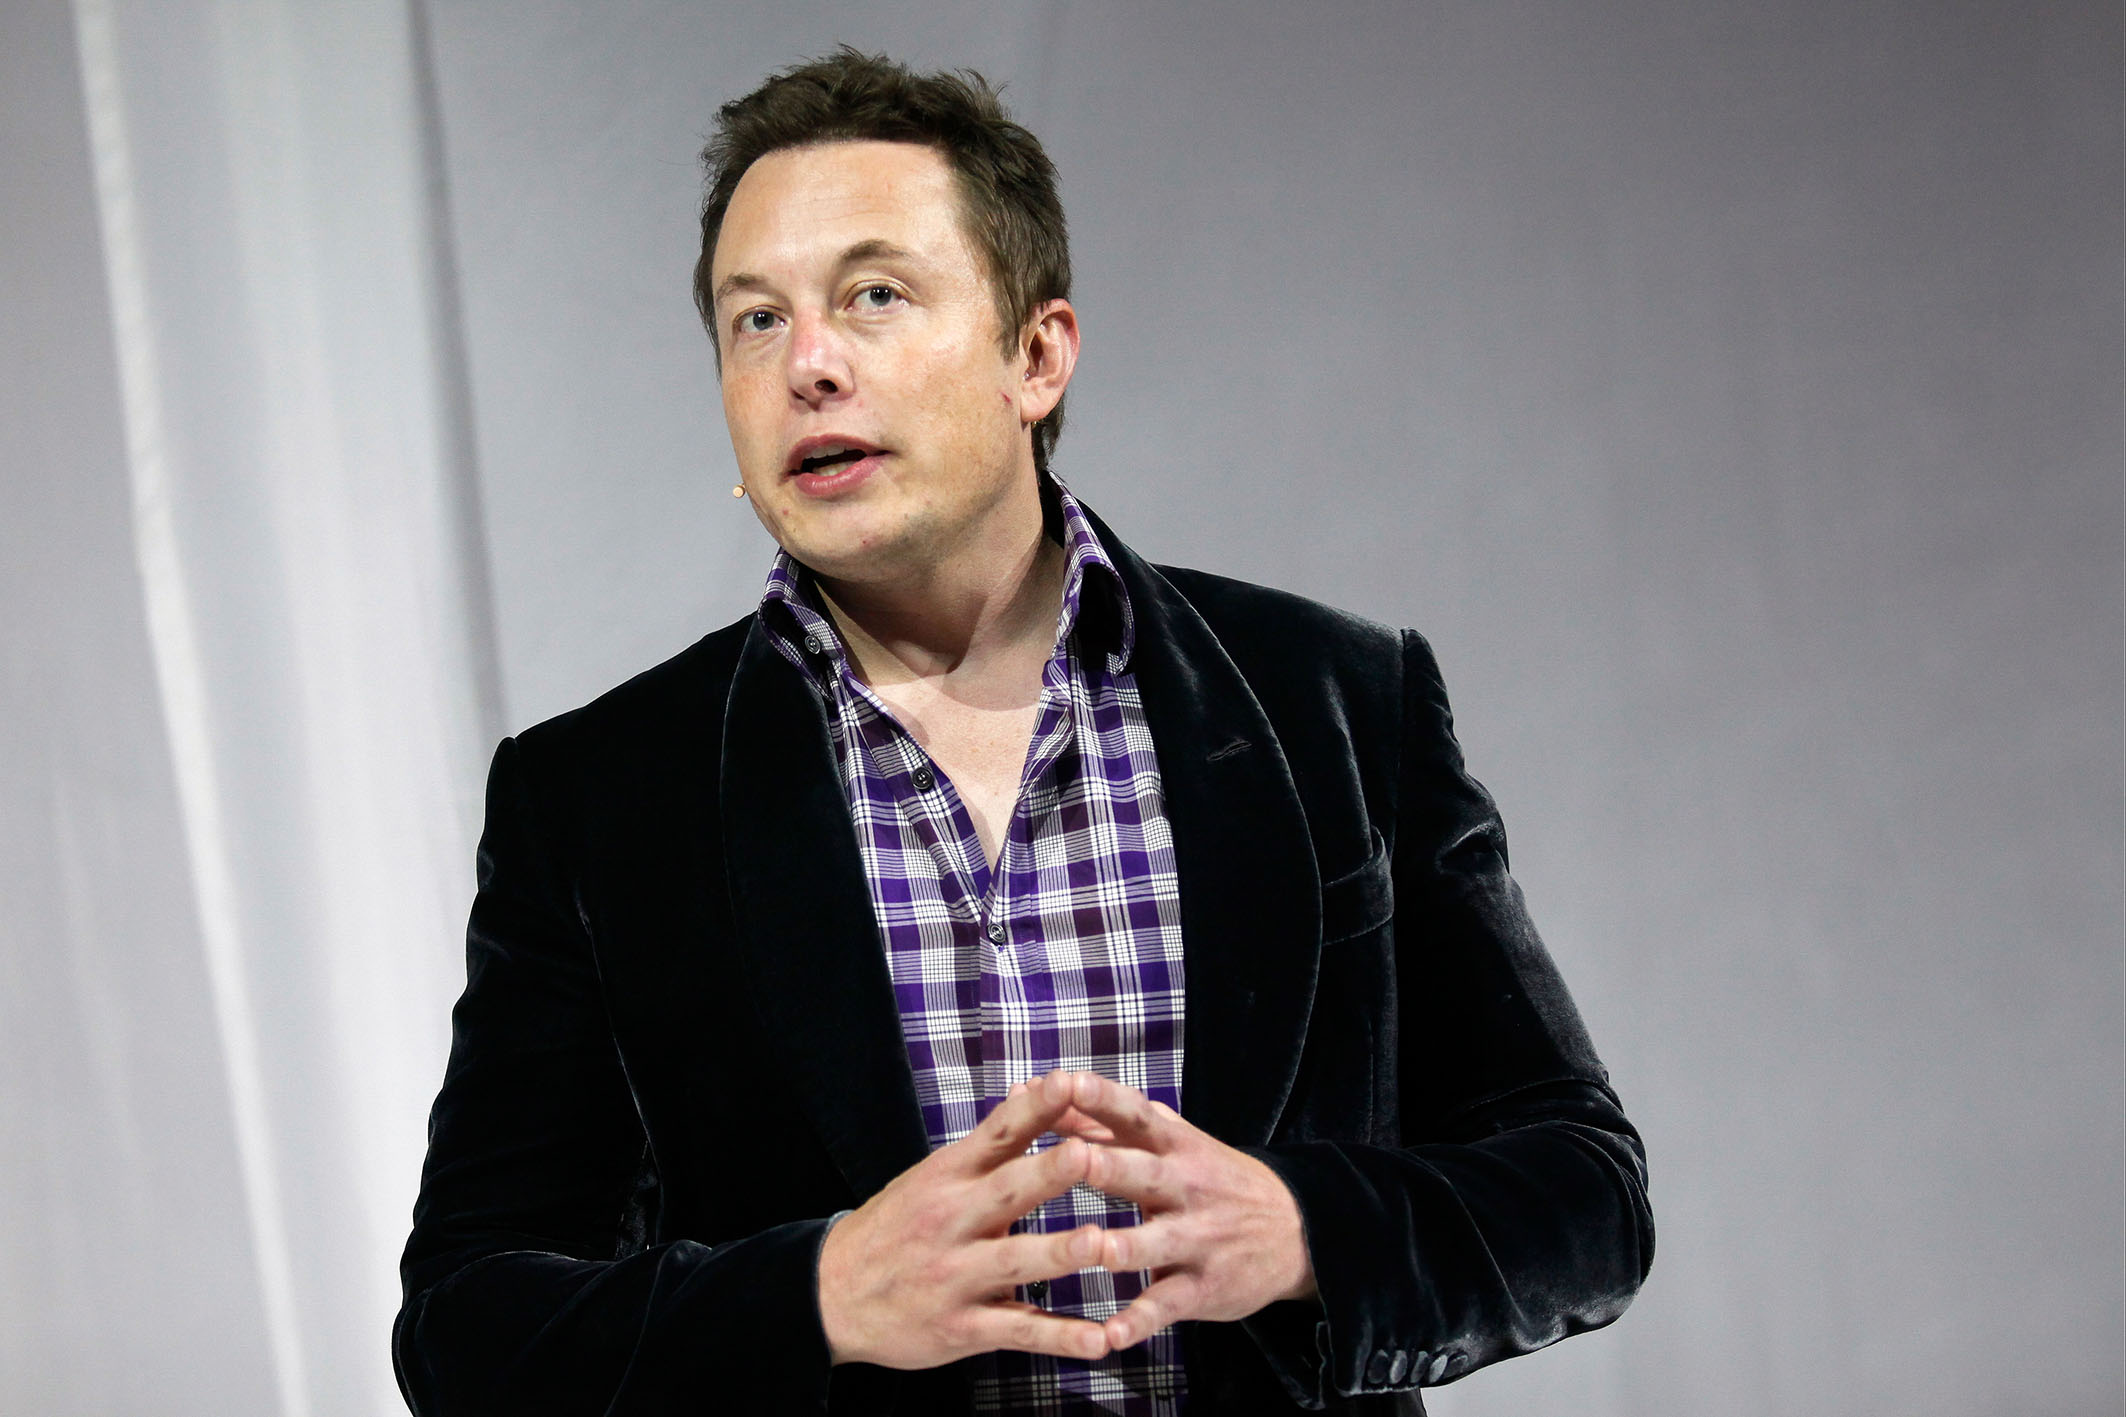 MARS.Elon Musk, Founder, CEO and Lead Designer SpaceX, Co-founder and CEO of Tesla Motors, and Co-founder and Chairman of Solarcity.